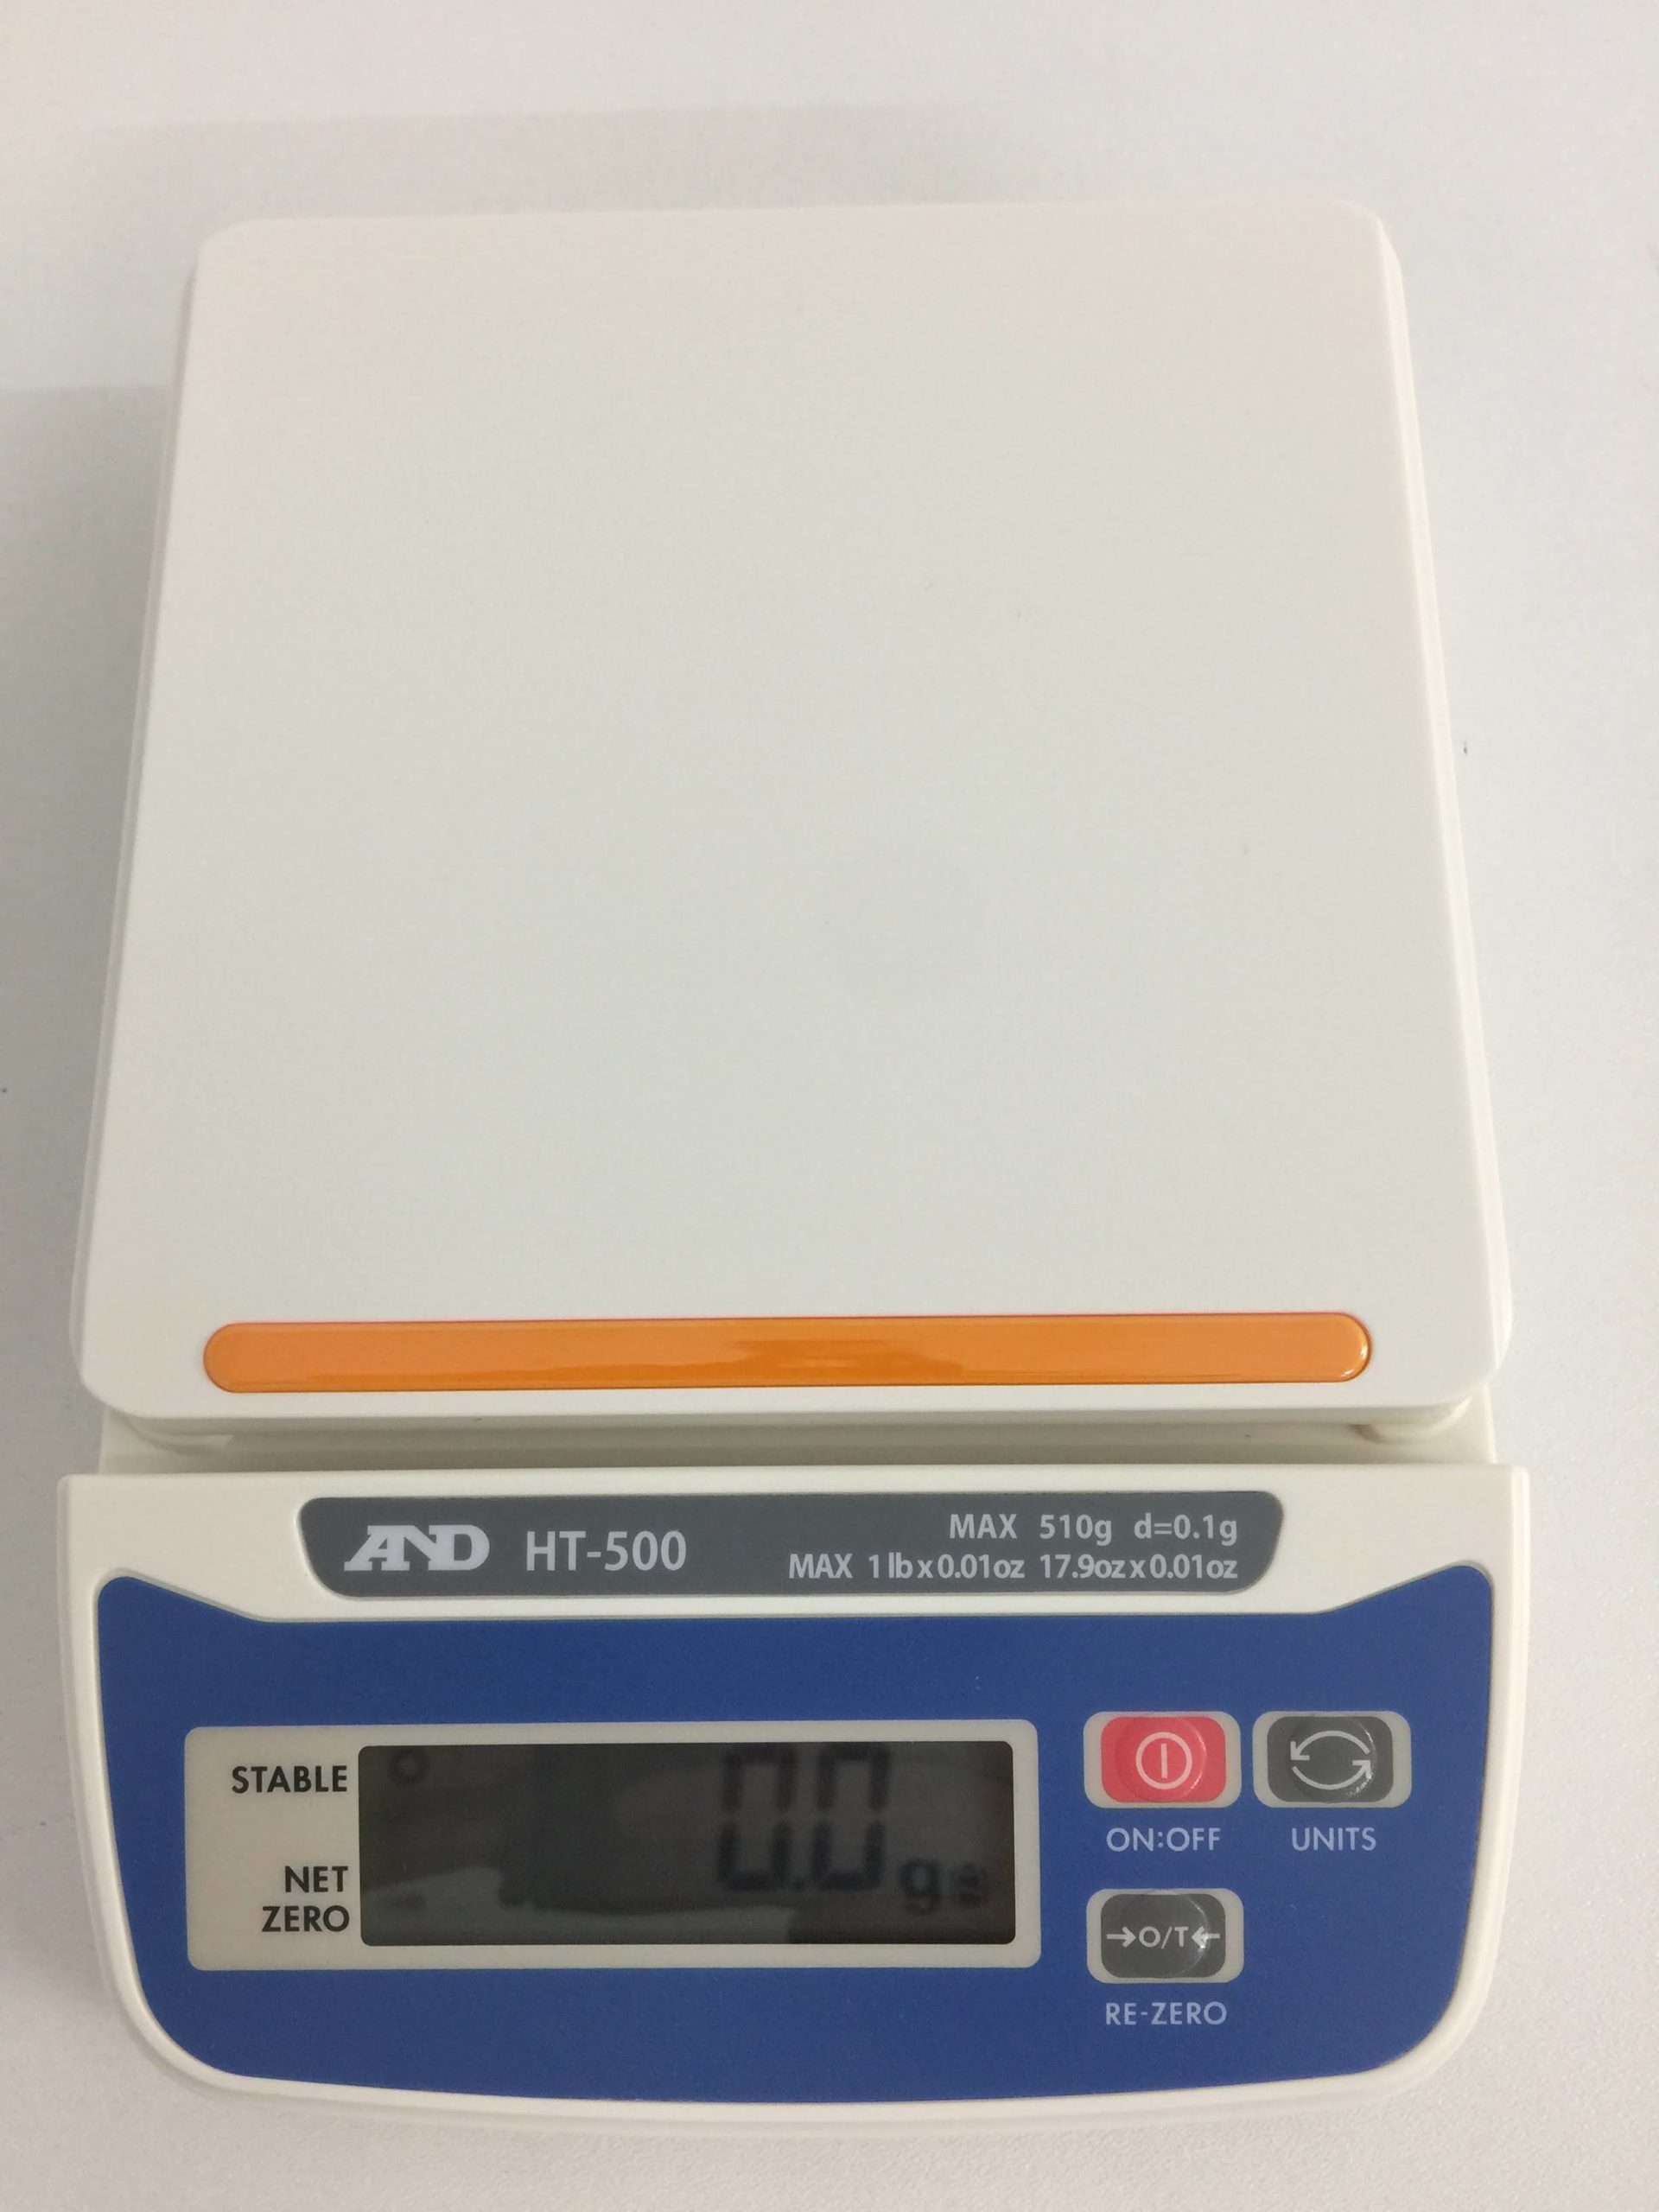 a&d ht-500 compact scale